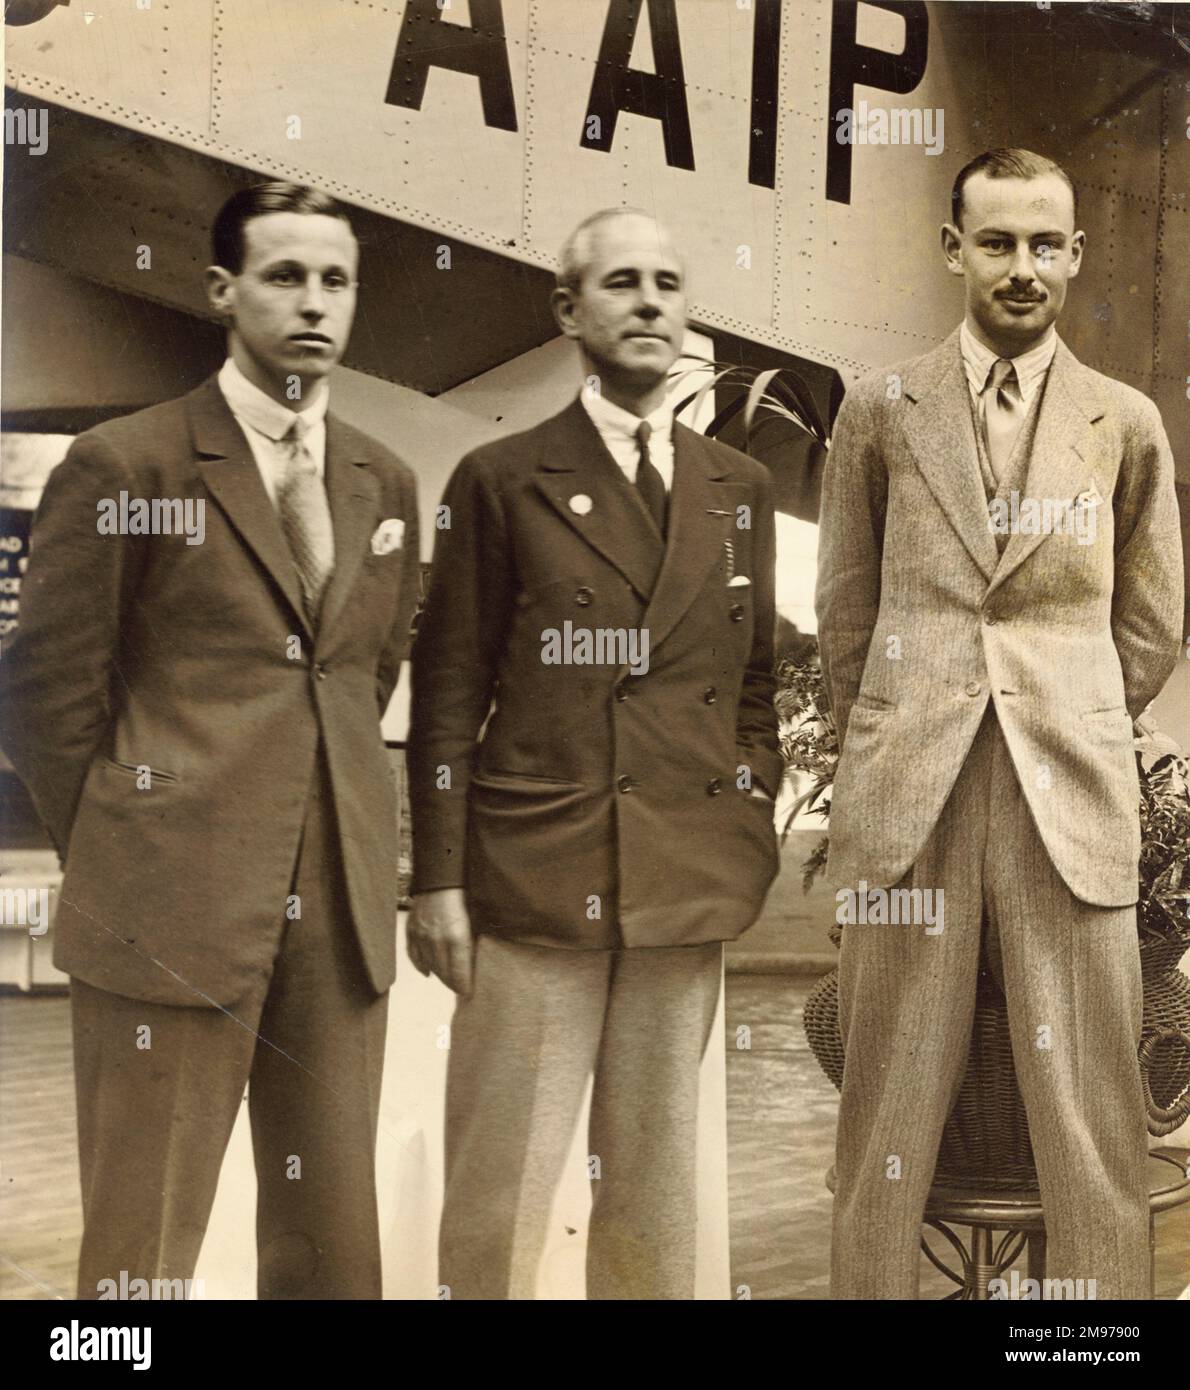 From left: Lord Junior, Sir Alliott Verdon Roe and Mr Perfect in front of Saunders-Roe Cutty Sark, G-AAIP. Stock Photo